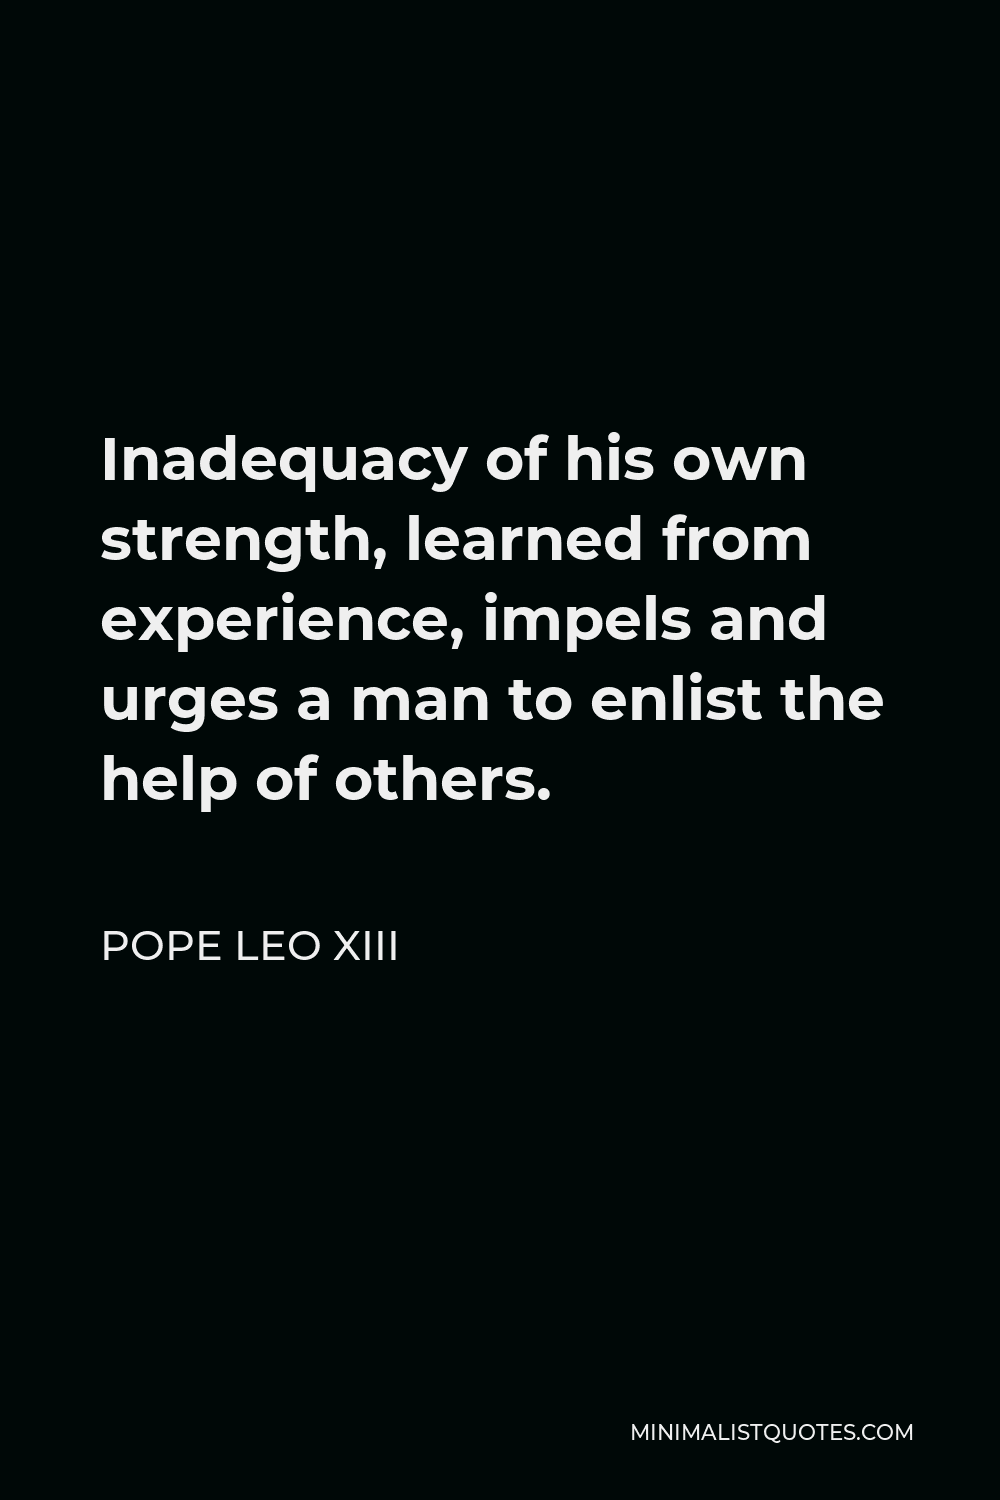 Pope Leo XIII Quote - Inadequacy of his own strength, learned from experience, impels and urges a man to enlist the help of others.